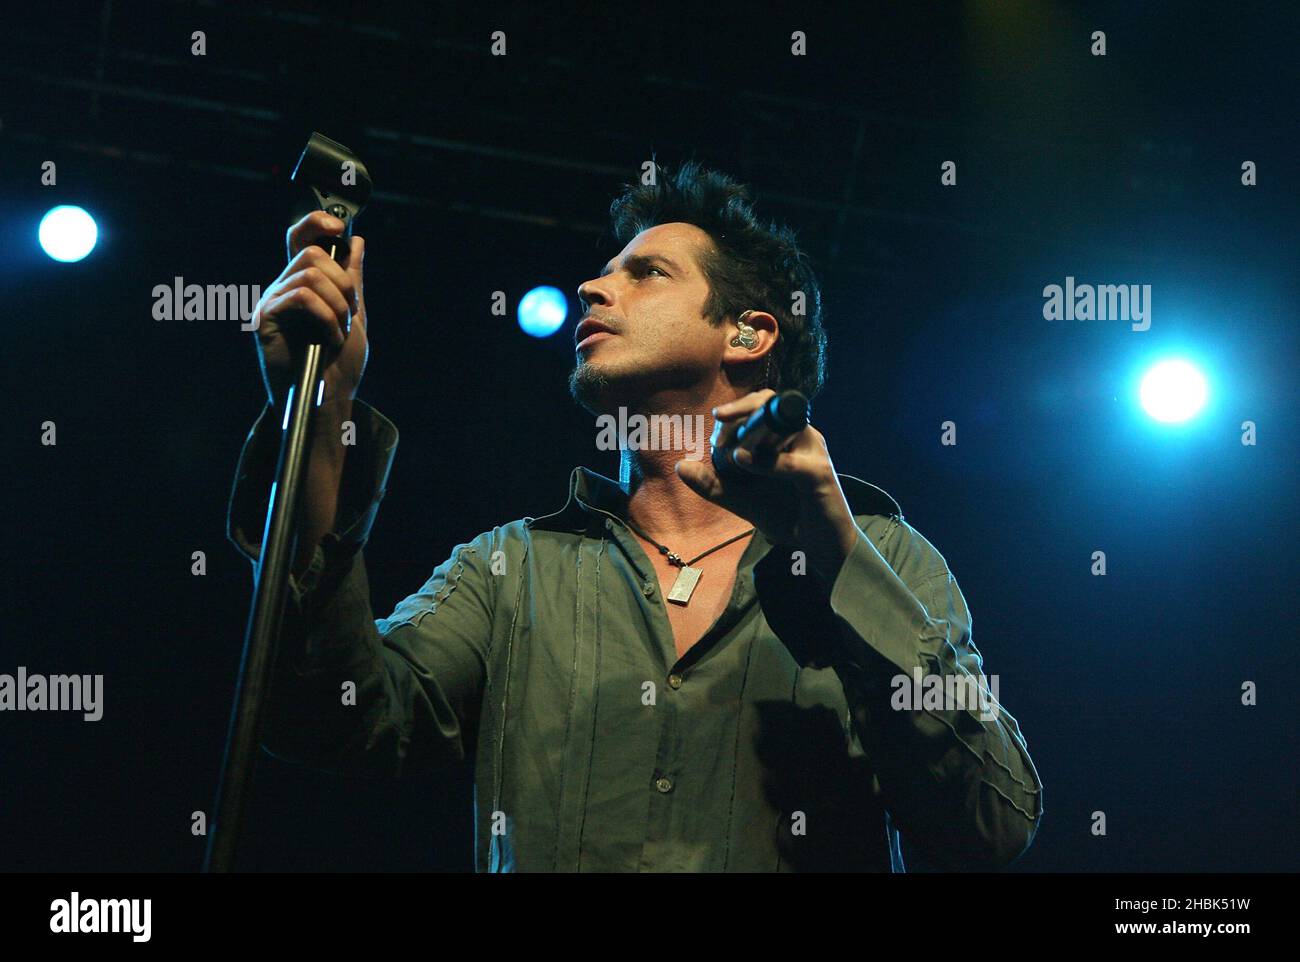 Chris Cornell live in concert at the Astoria in London on May 16, 2007. Stock Photo